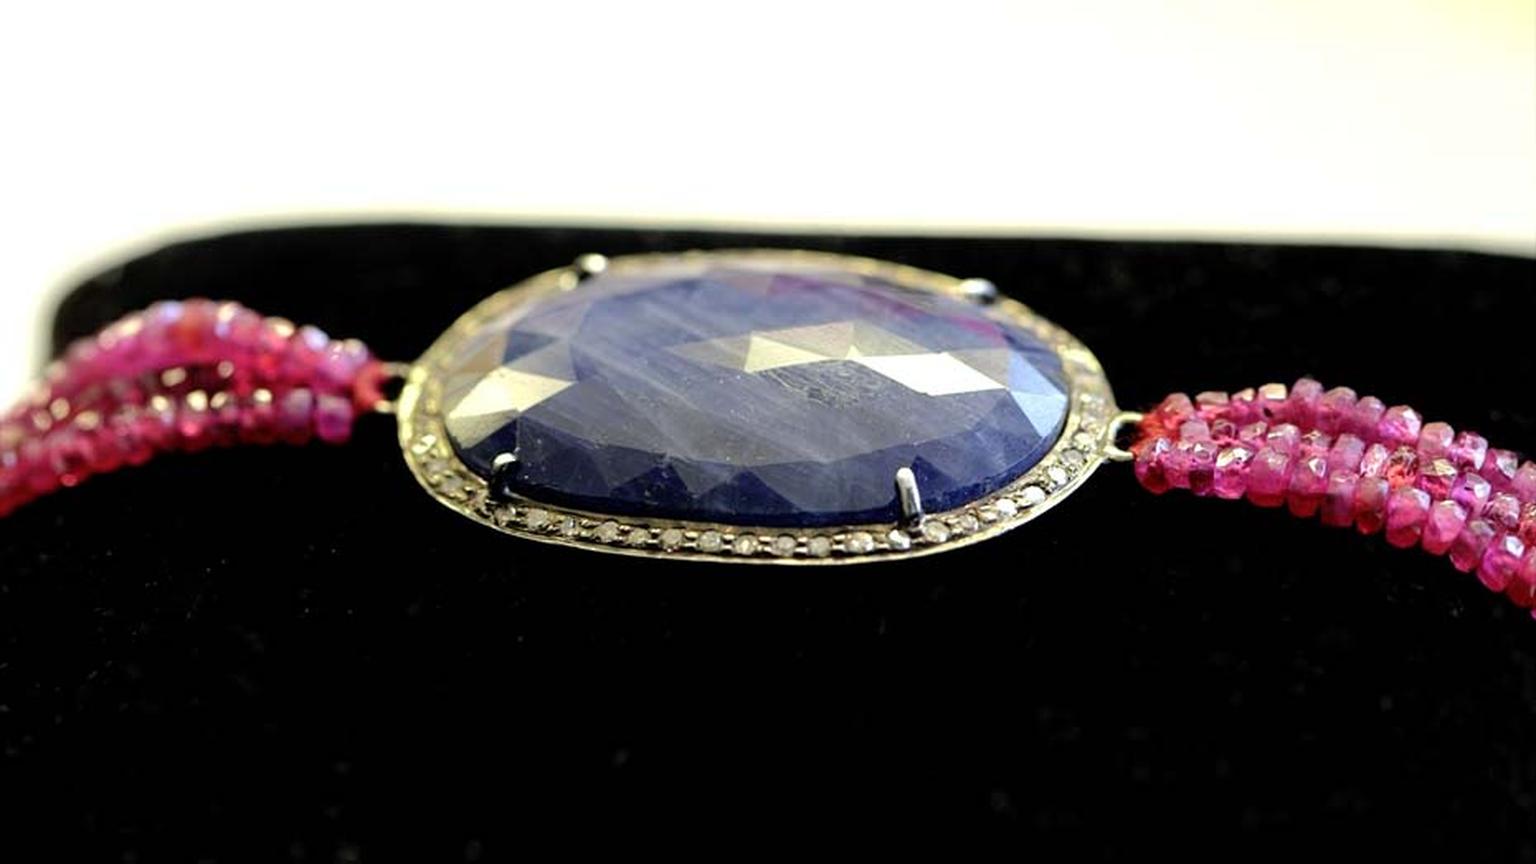 Jade Jagger NeverEnding bracelet with oval blue sapphire, ruby bead and diamonds, available exclusively at 1stdibs.com